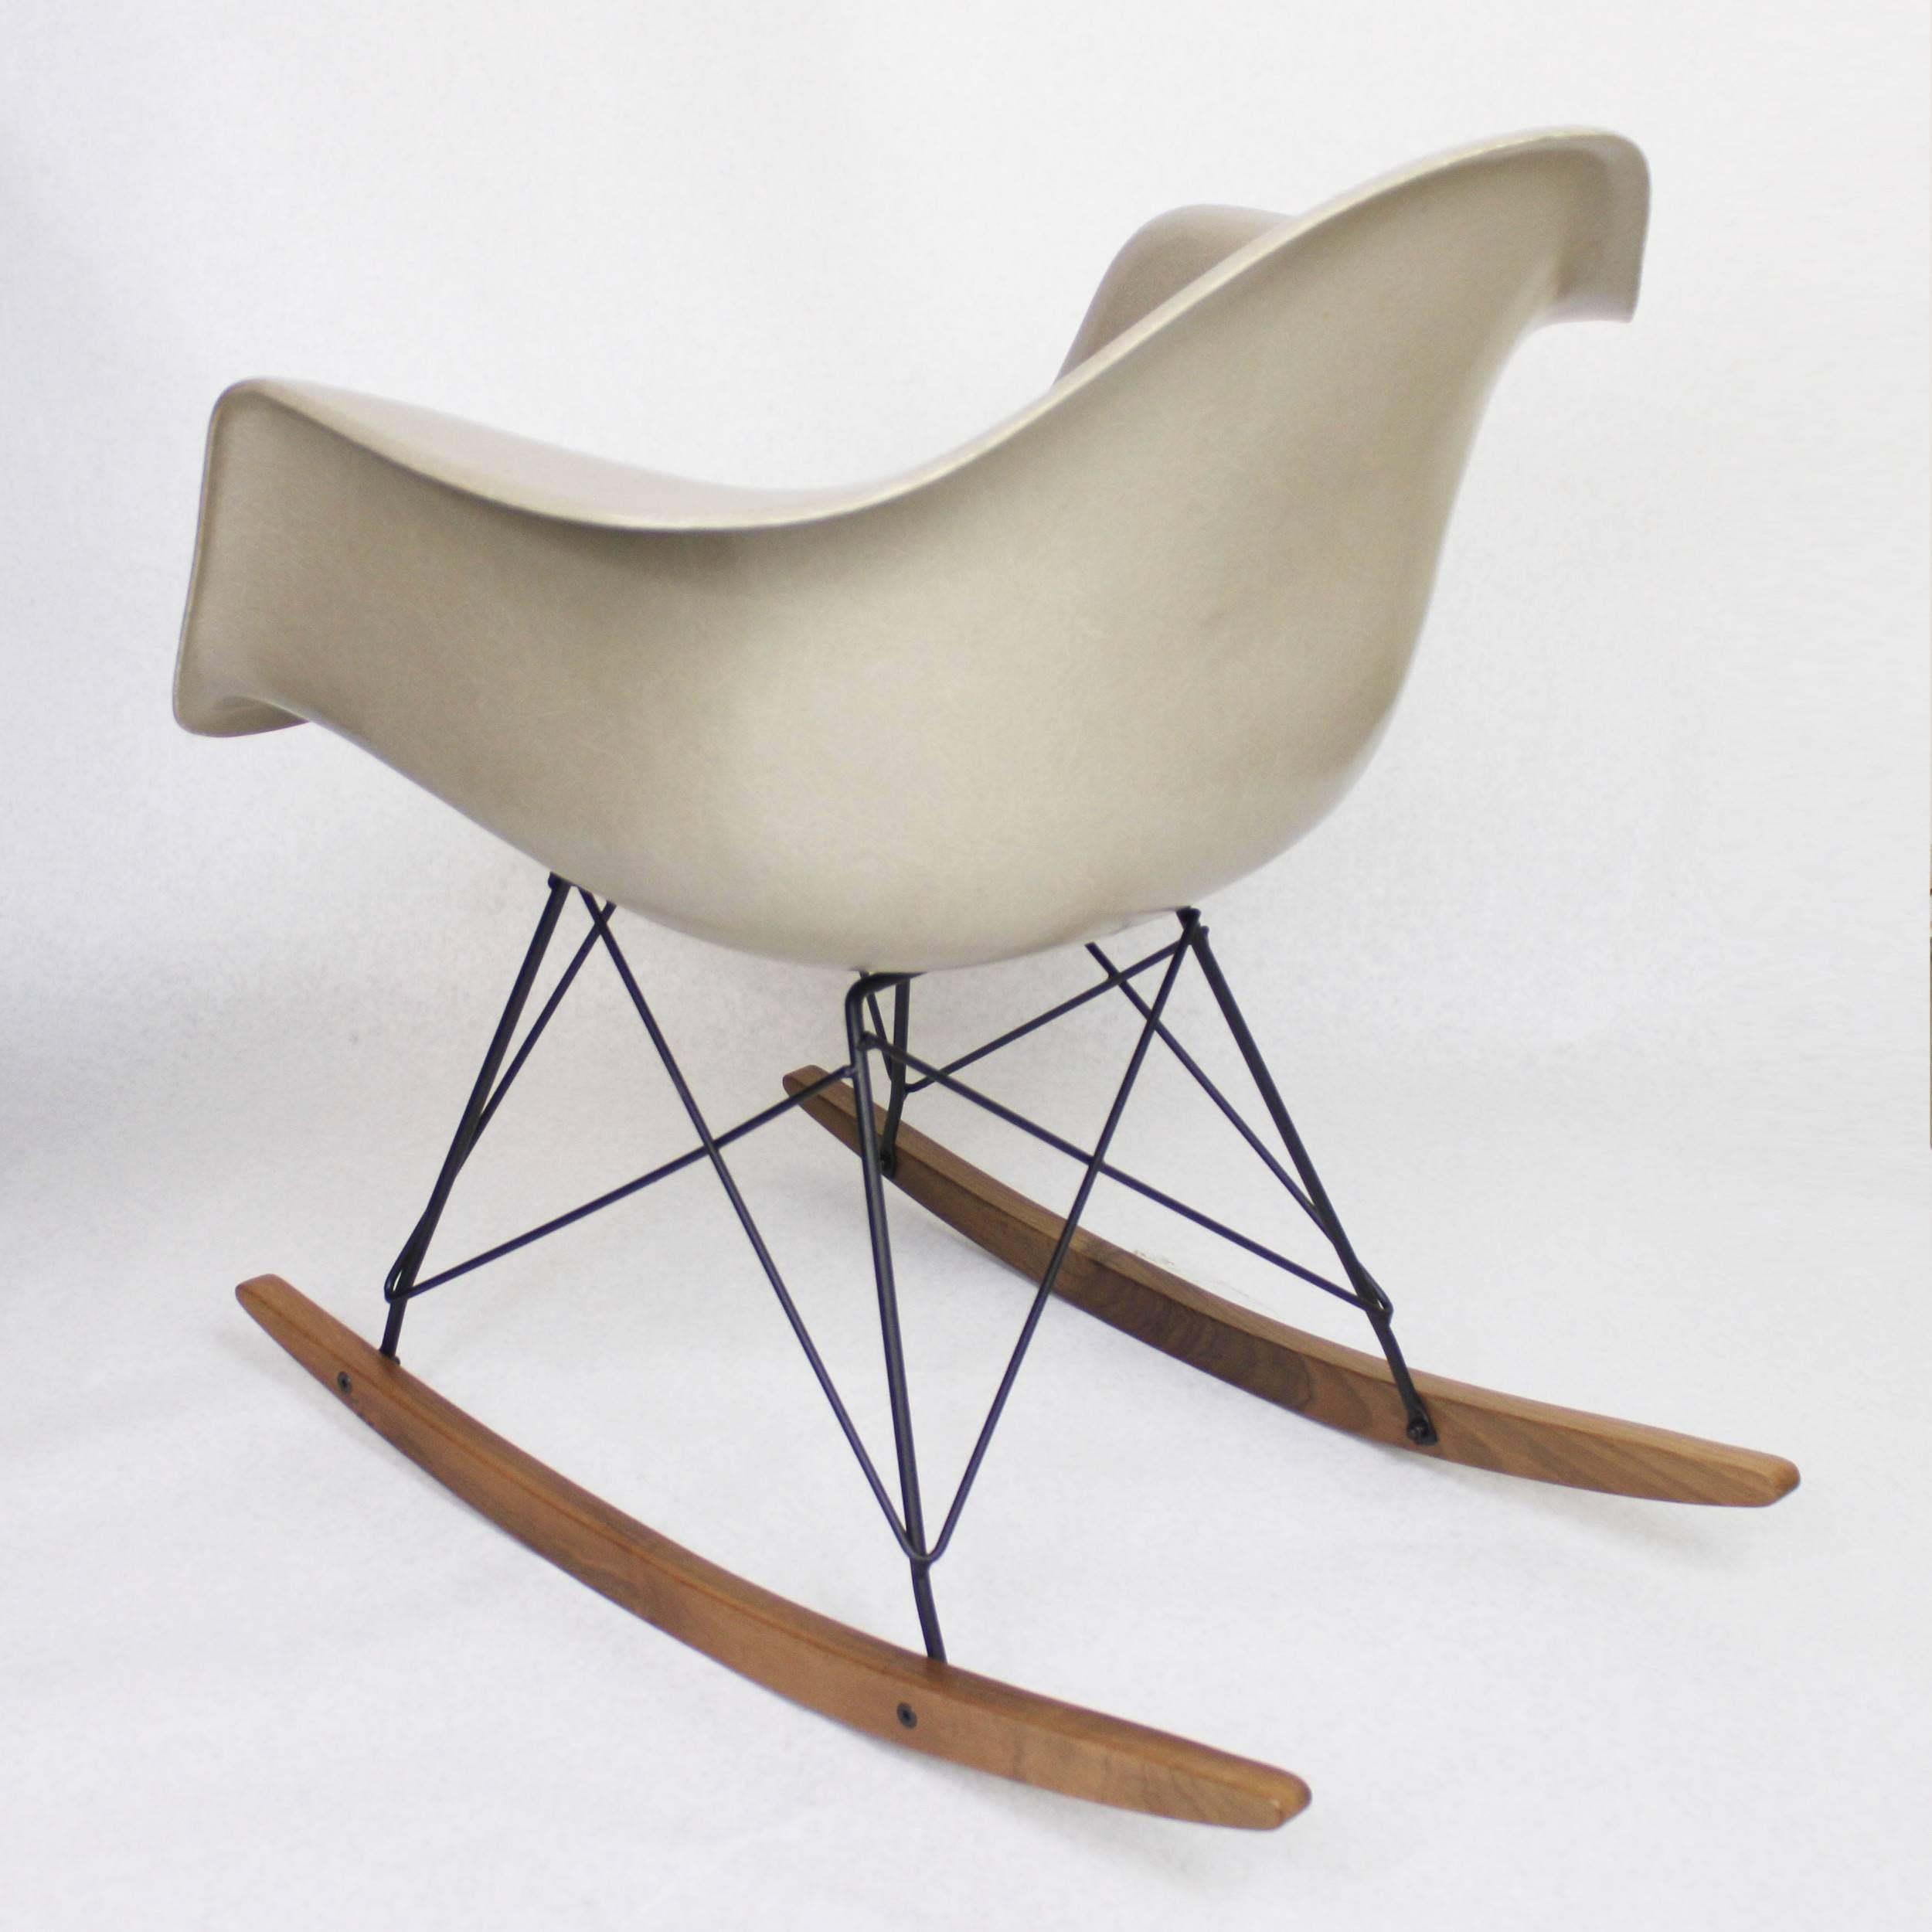 This is a wonderful original example of the Eames shell chair in one of the most desirable vintage colors offered, 'Greige'. This chair is in spectacular condition with only very, very minor scuffs anywhere on the fiberglass. Shell has been paired